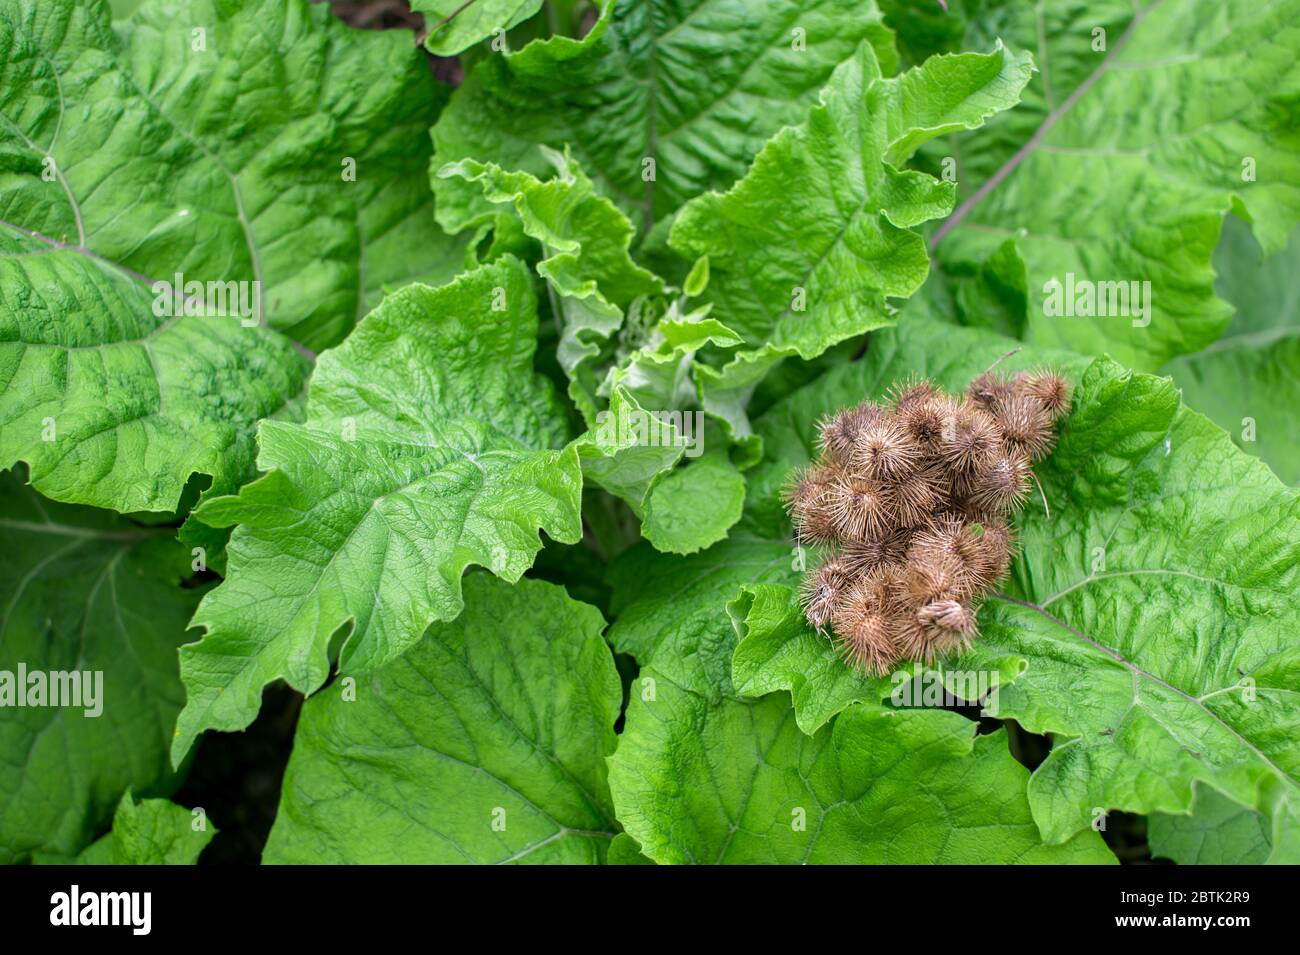 Burdock with large green leaves close-up and dry last year's thistles on them in the spring. Natural background. Latin name Arctium lappa. Stock Photo